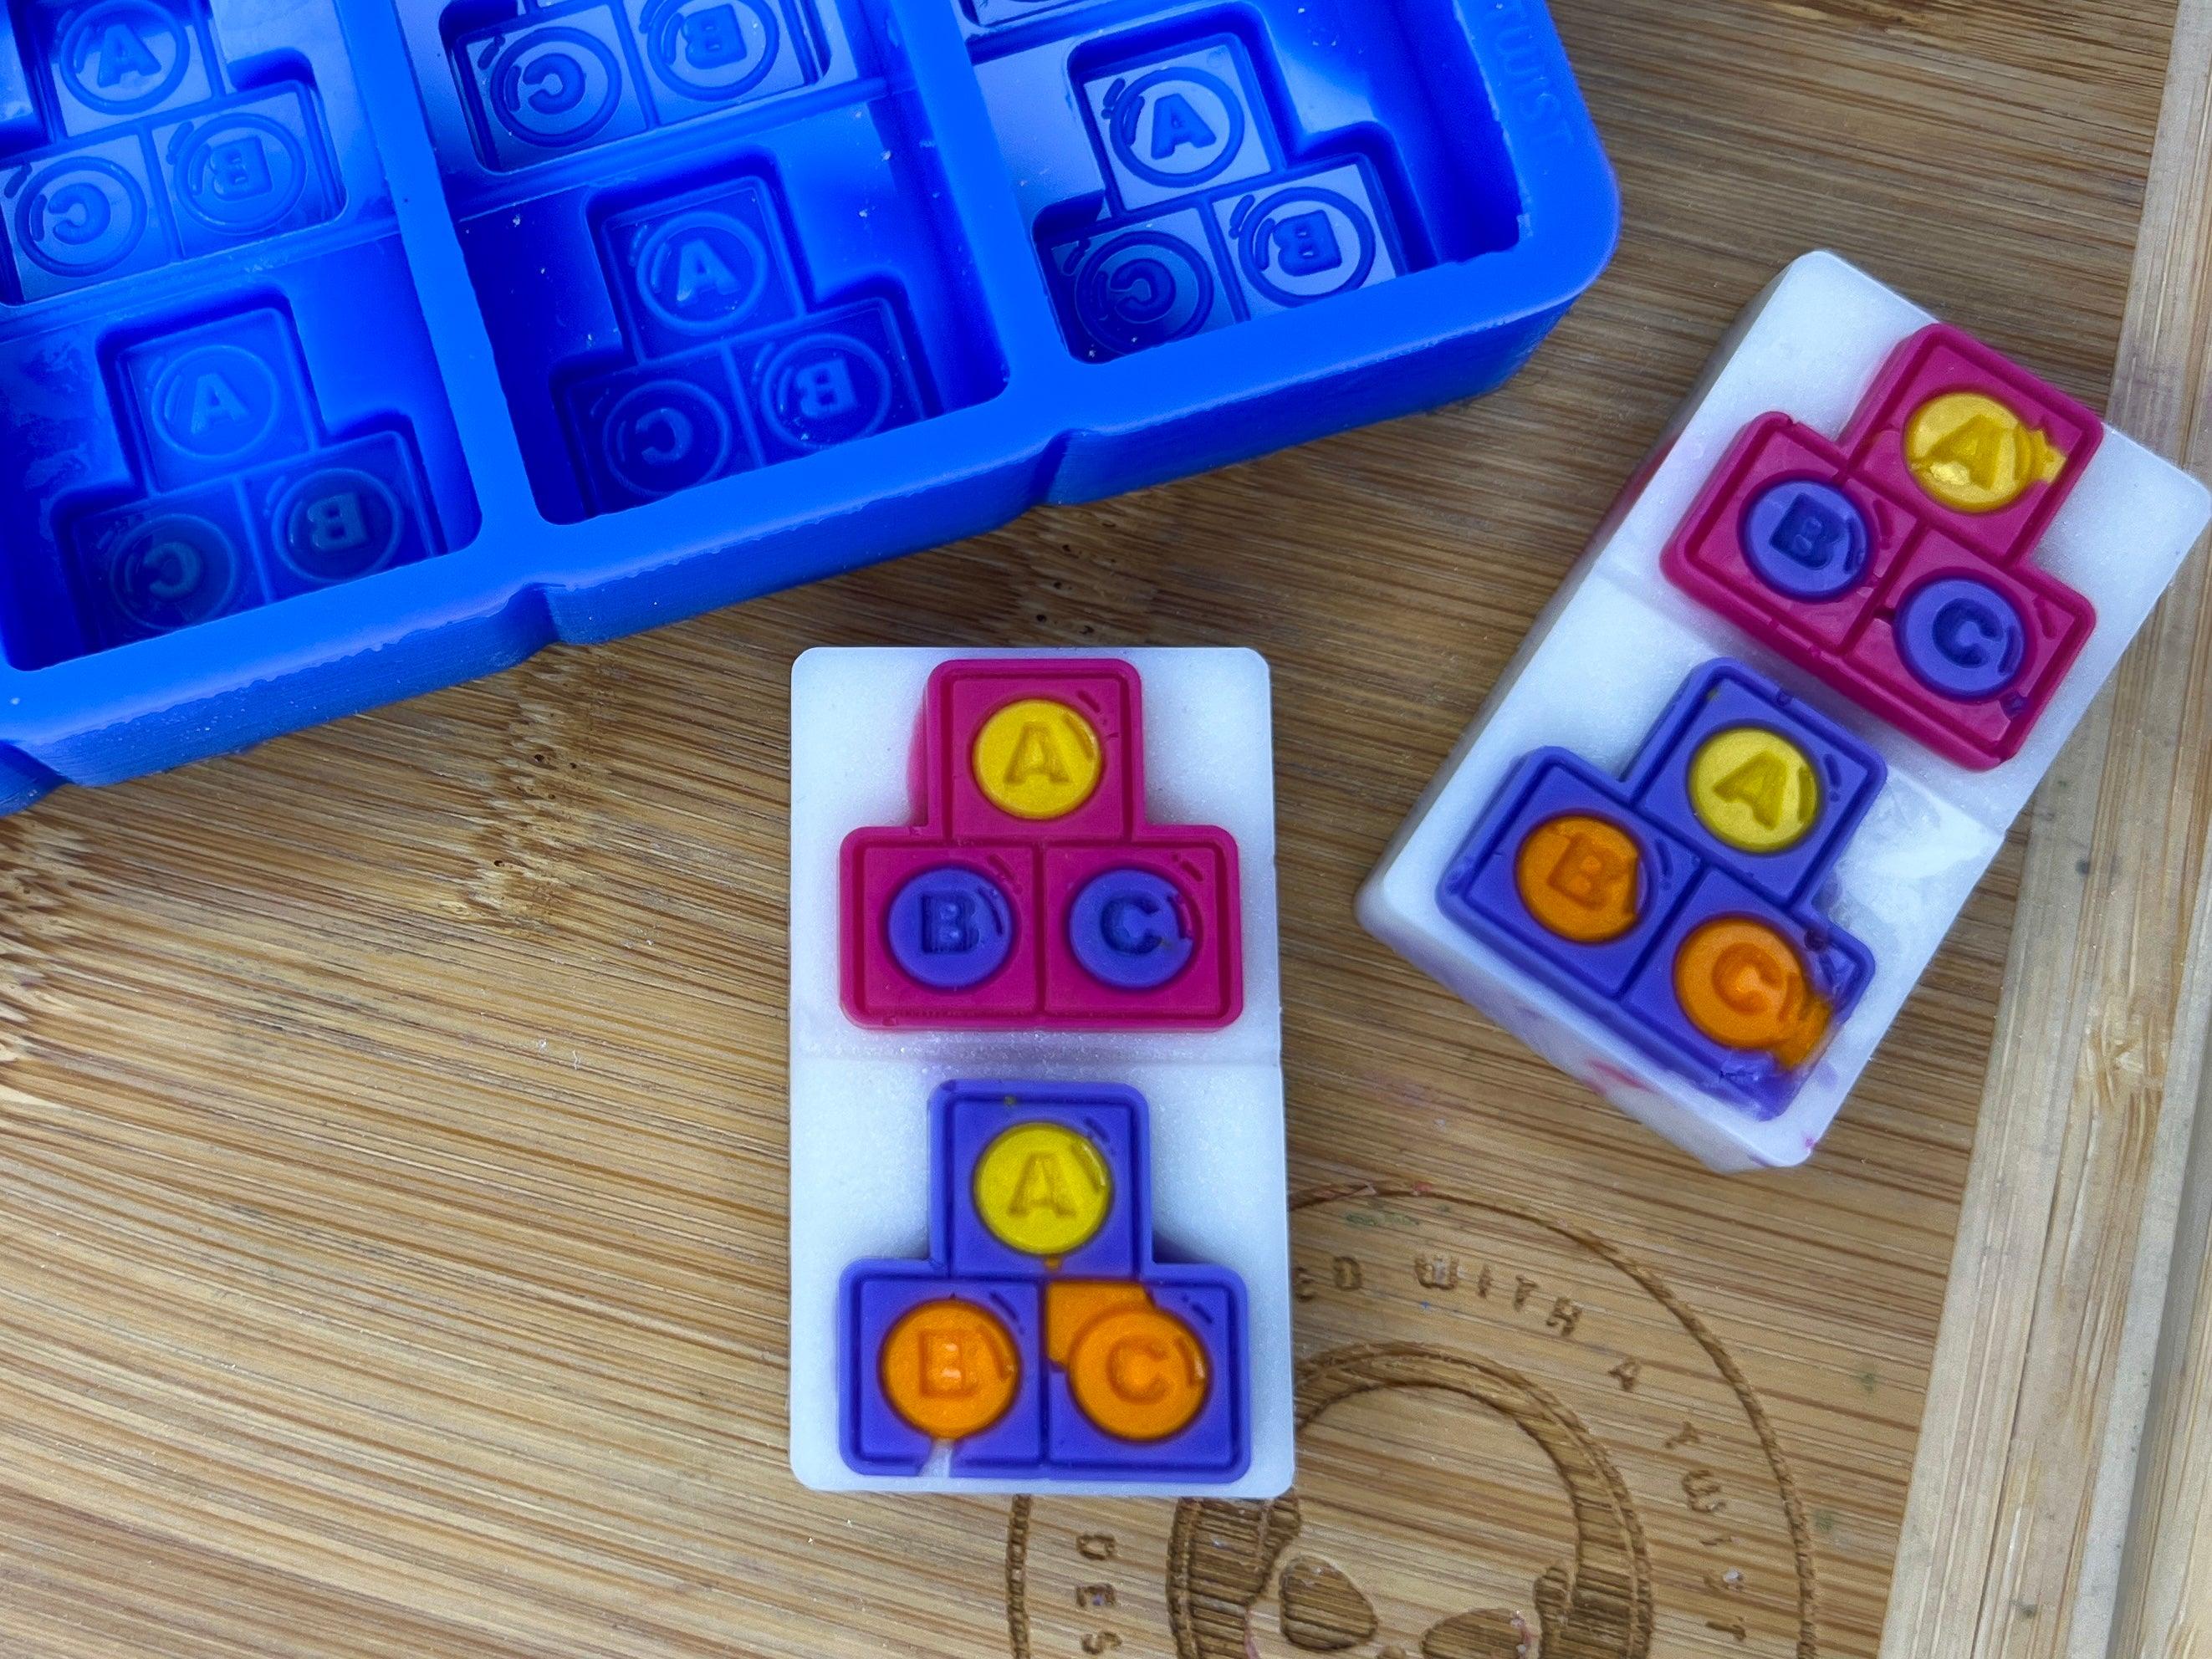 Alphabet Blocks Silicone Mold - HoBa Edition - Designed with a Twist - Top quality silicone molds made in the UK.